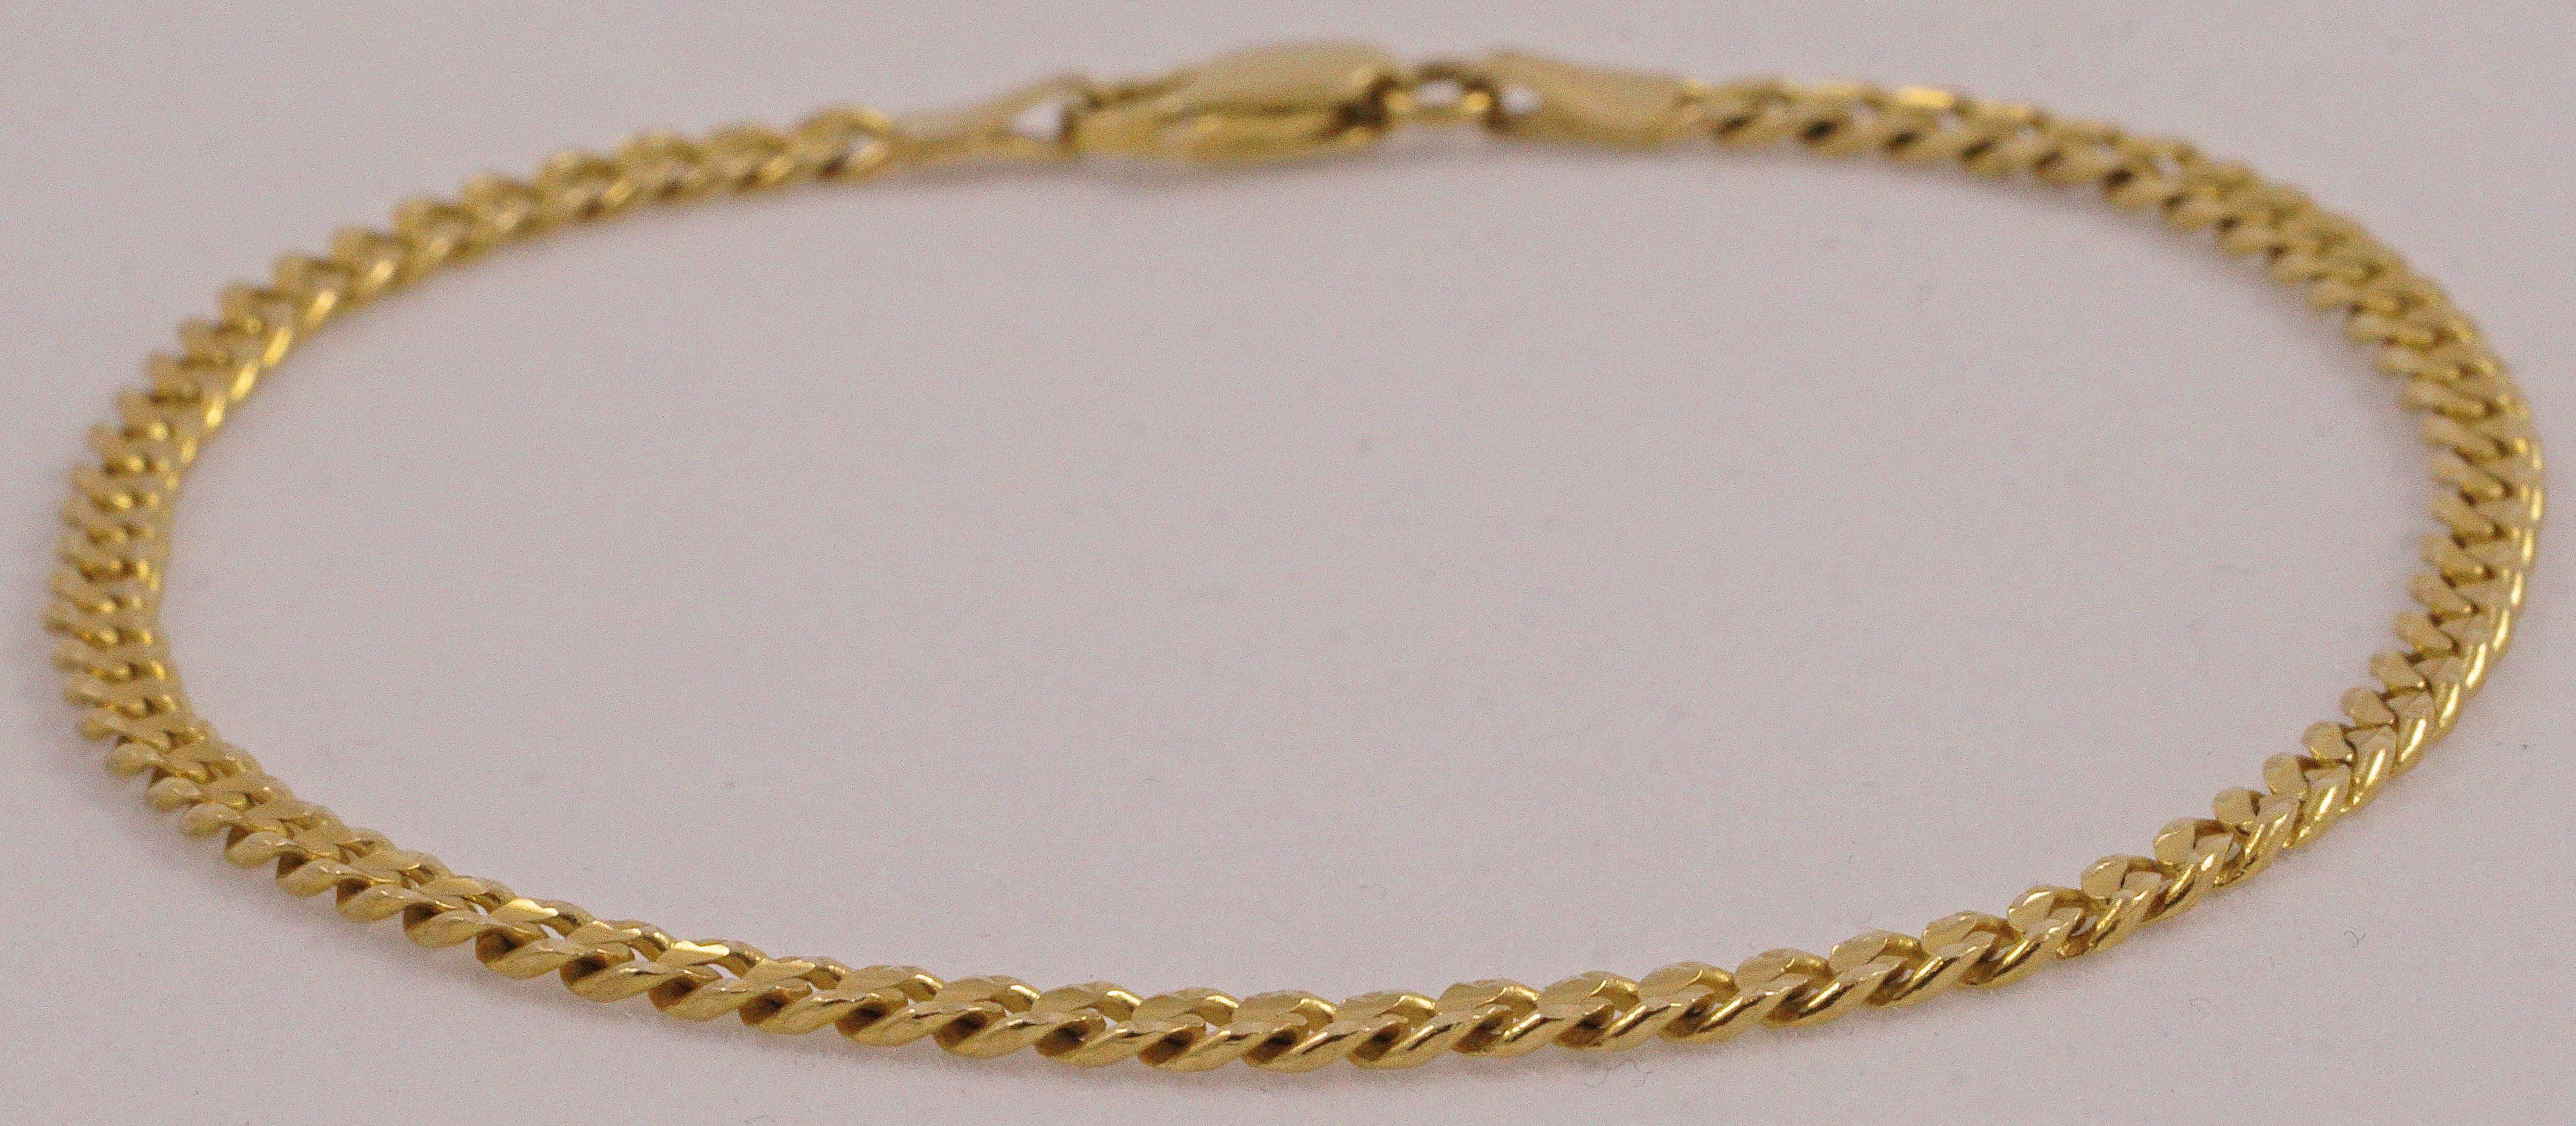 

14K gold bracelet, featuring a fancy cut link design. The bracelet is stamped ah, Italy, 985, 14K, and measures length 19cm (7.5inches) by width 3mm (.12 inch).

This is a beautiful yellow gold Italian bracelet with unusual links, in very good